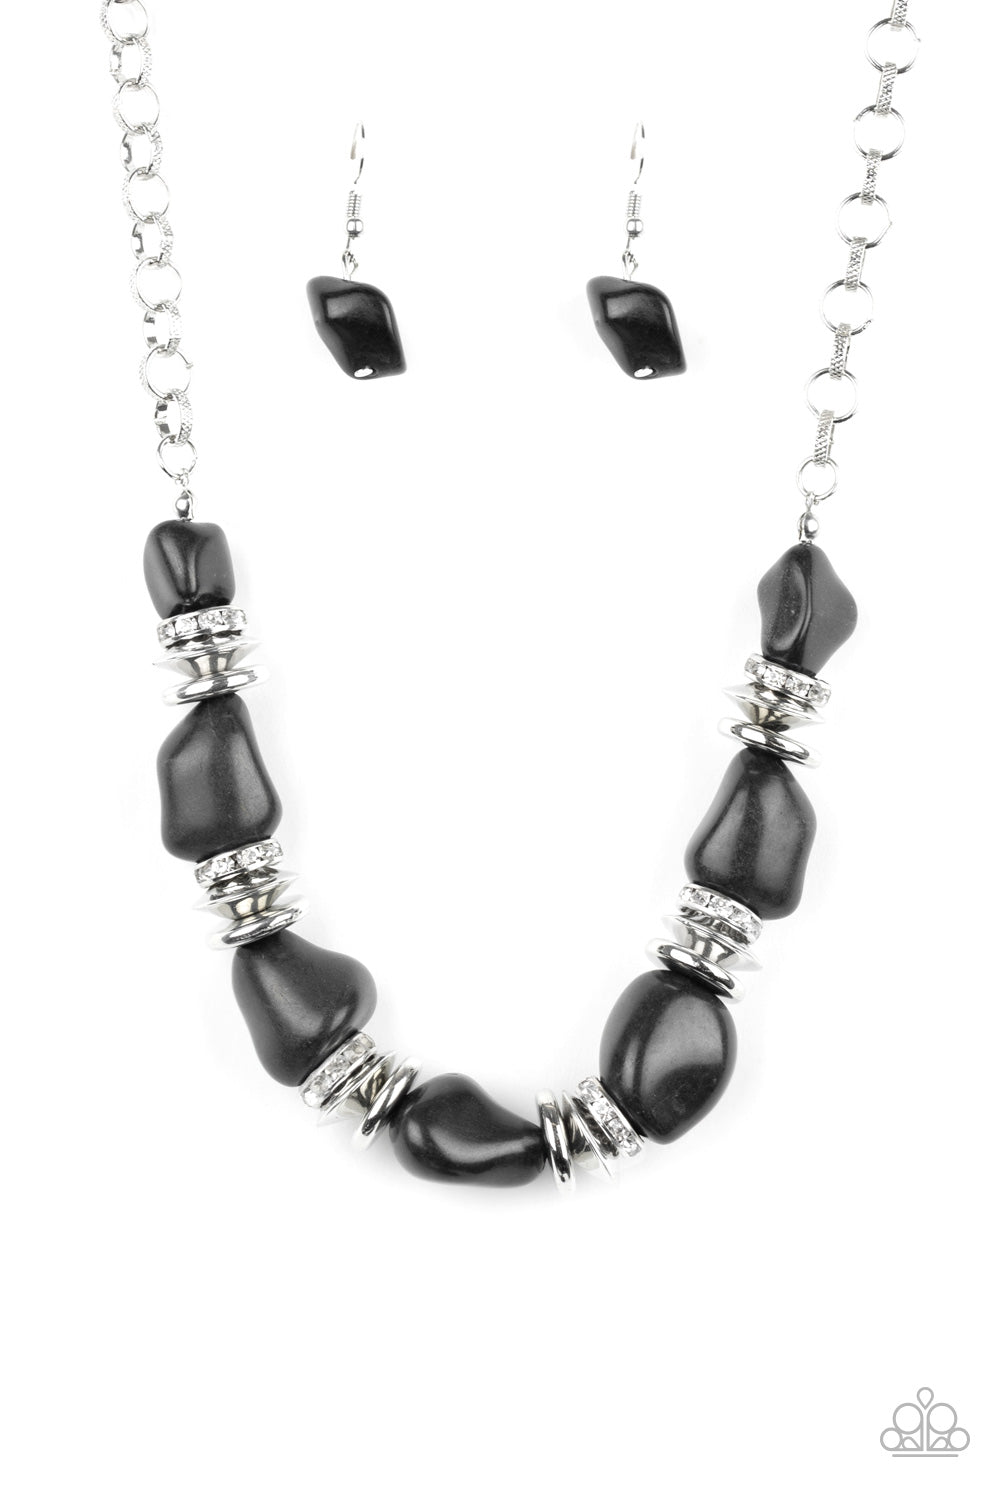 Stunningly Stone Age - Black - The V Resale Boutique